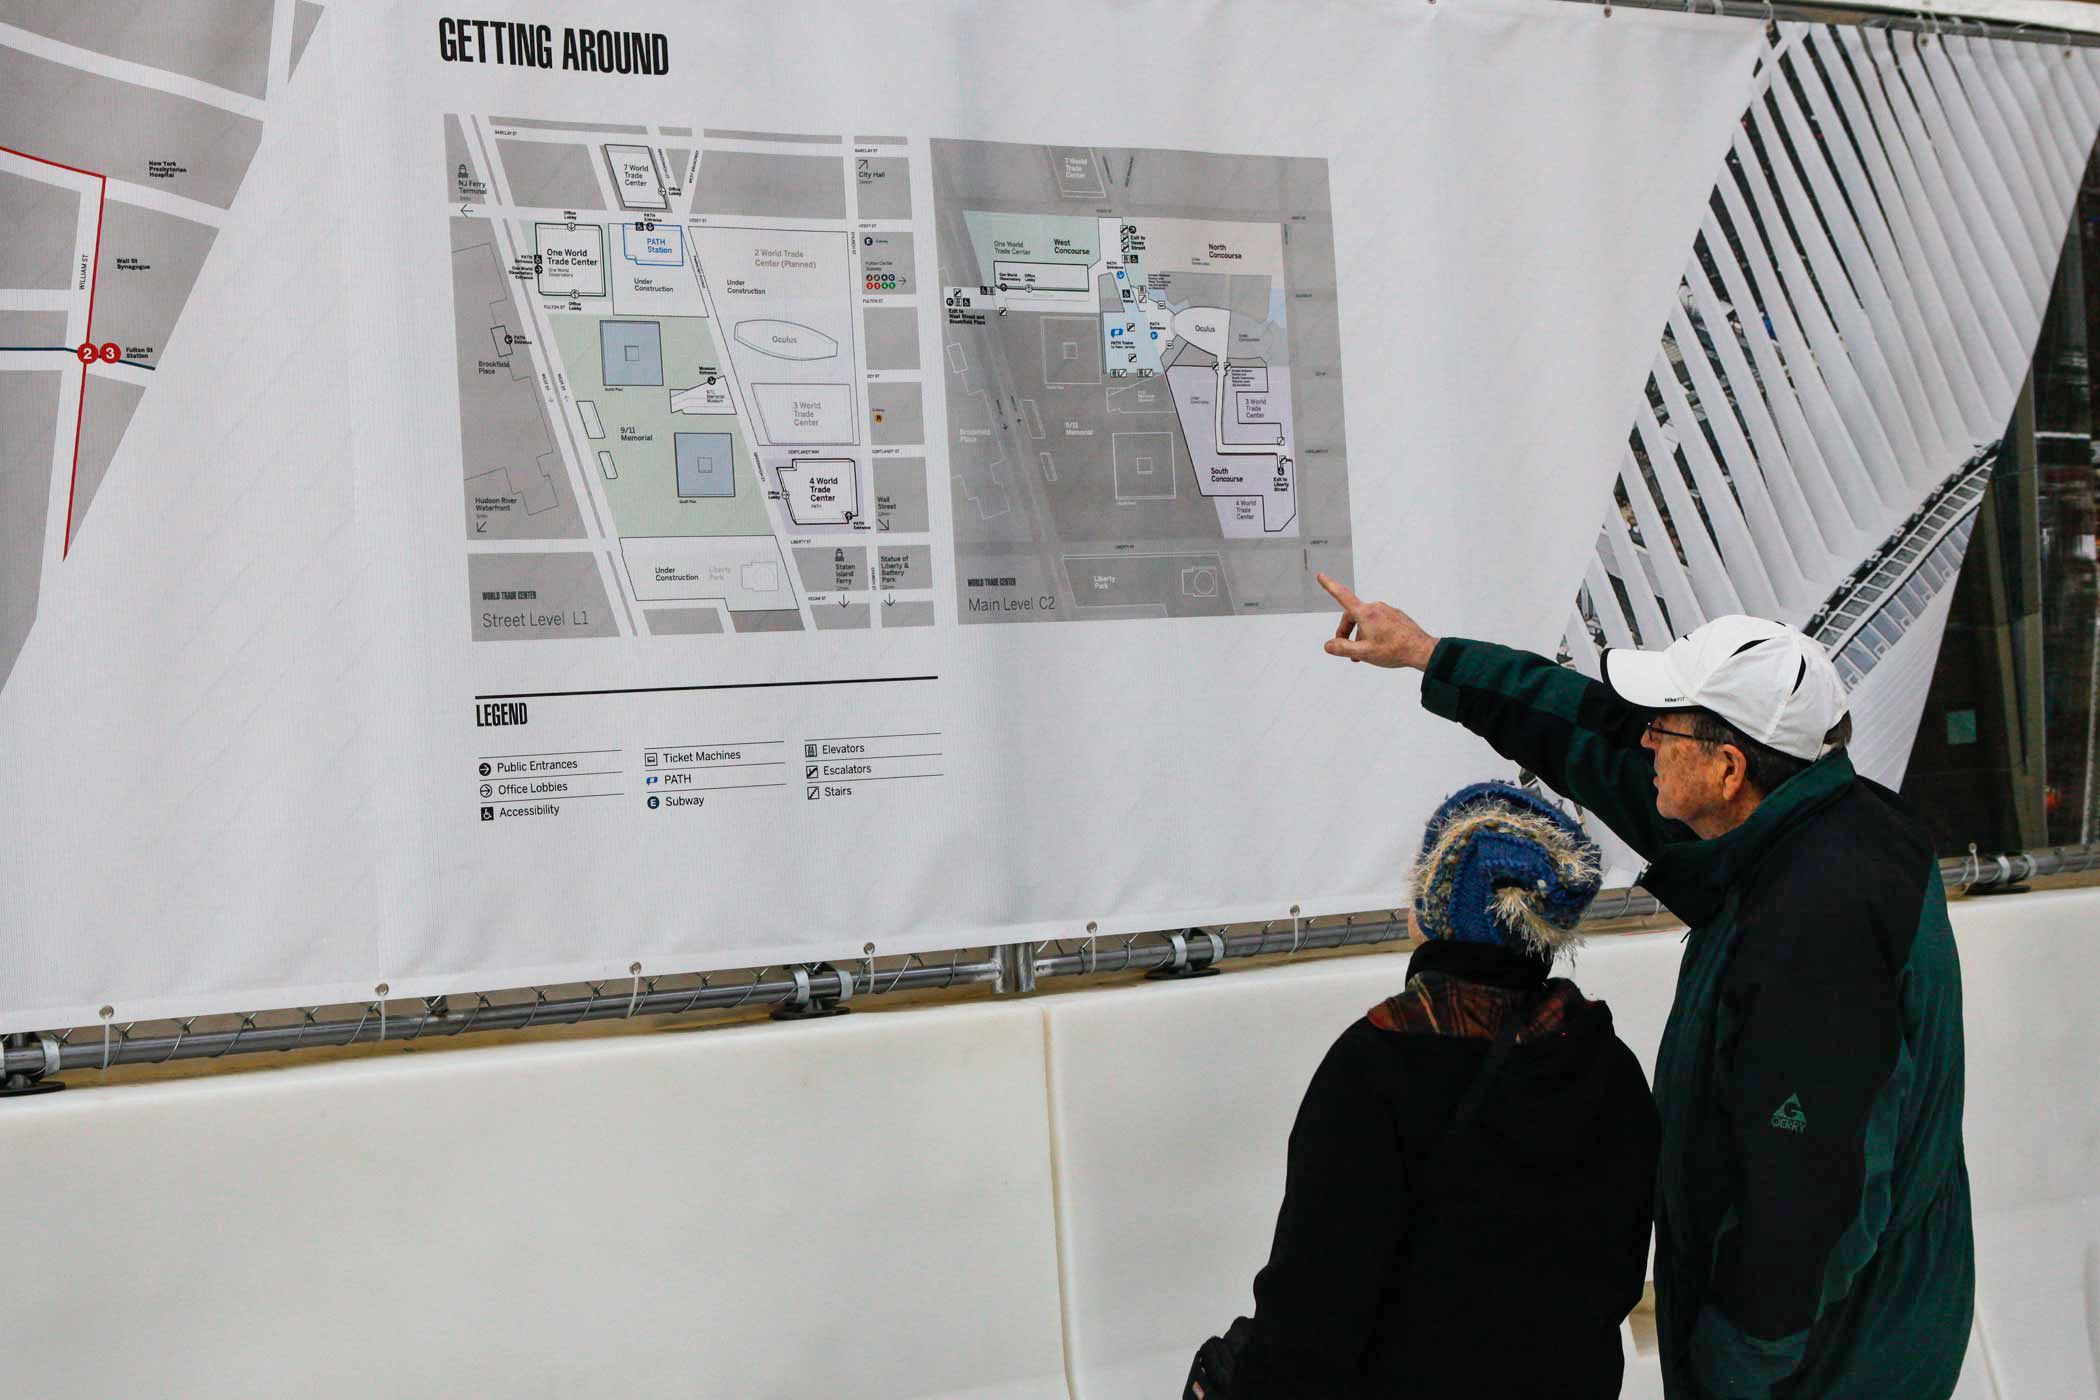 People inspect a map on the wall of downtown New York.